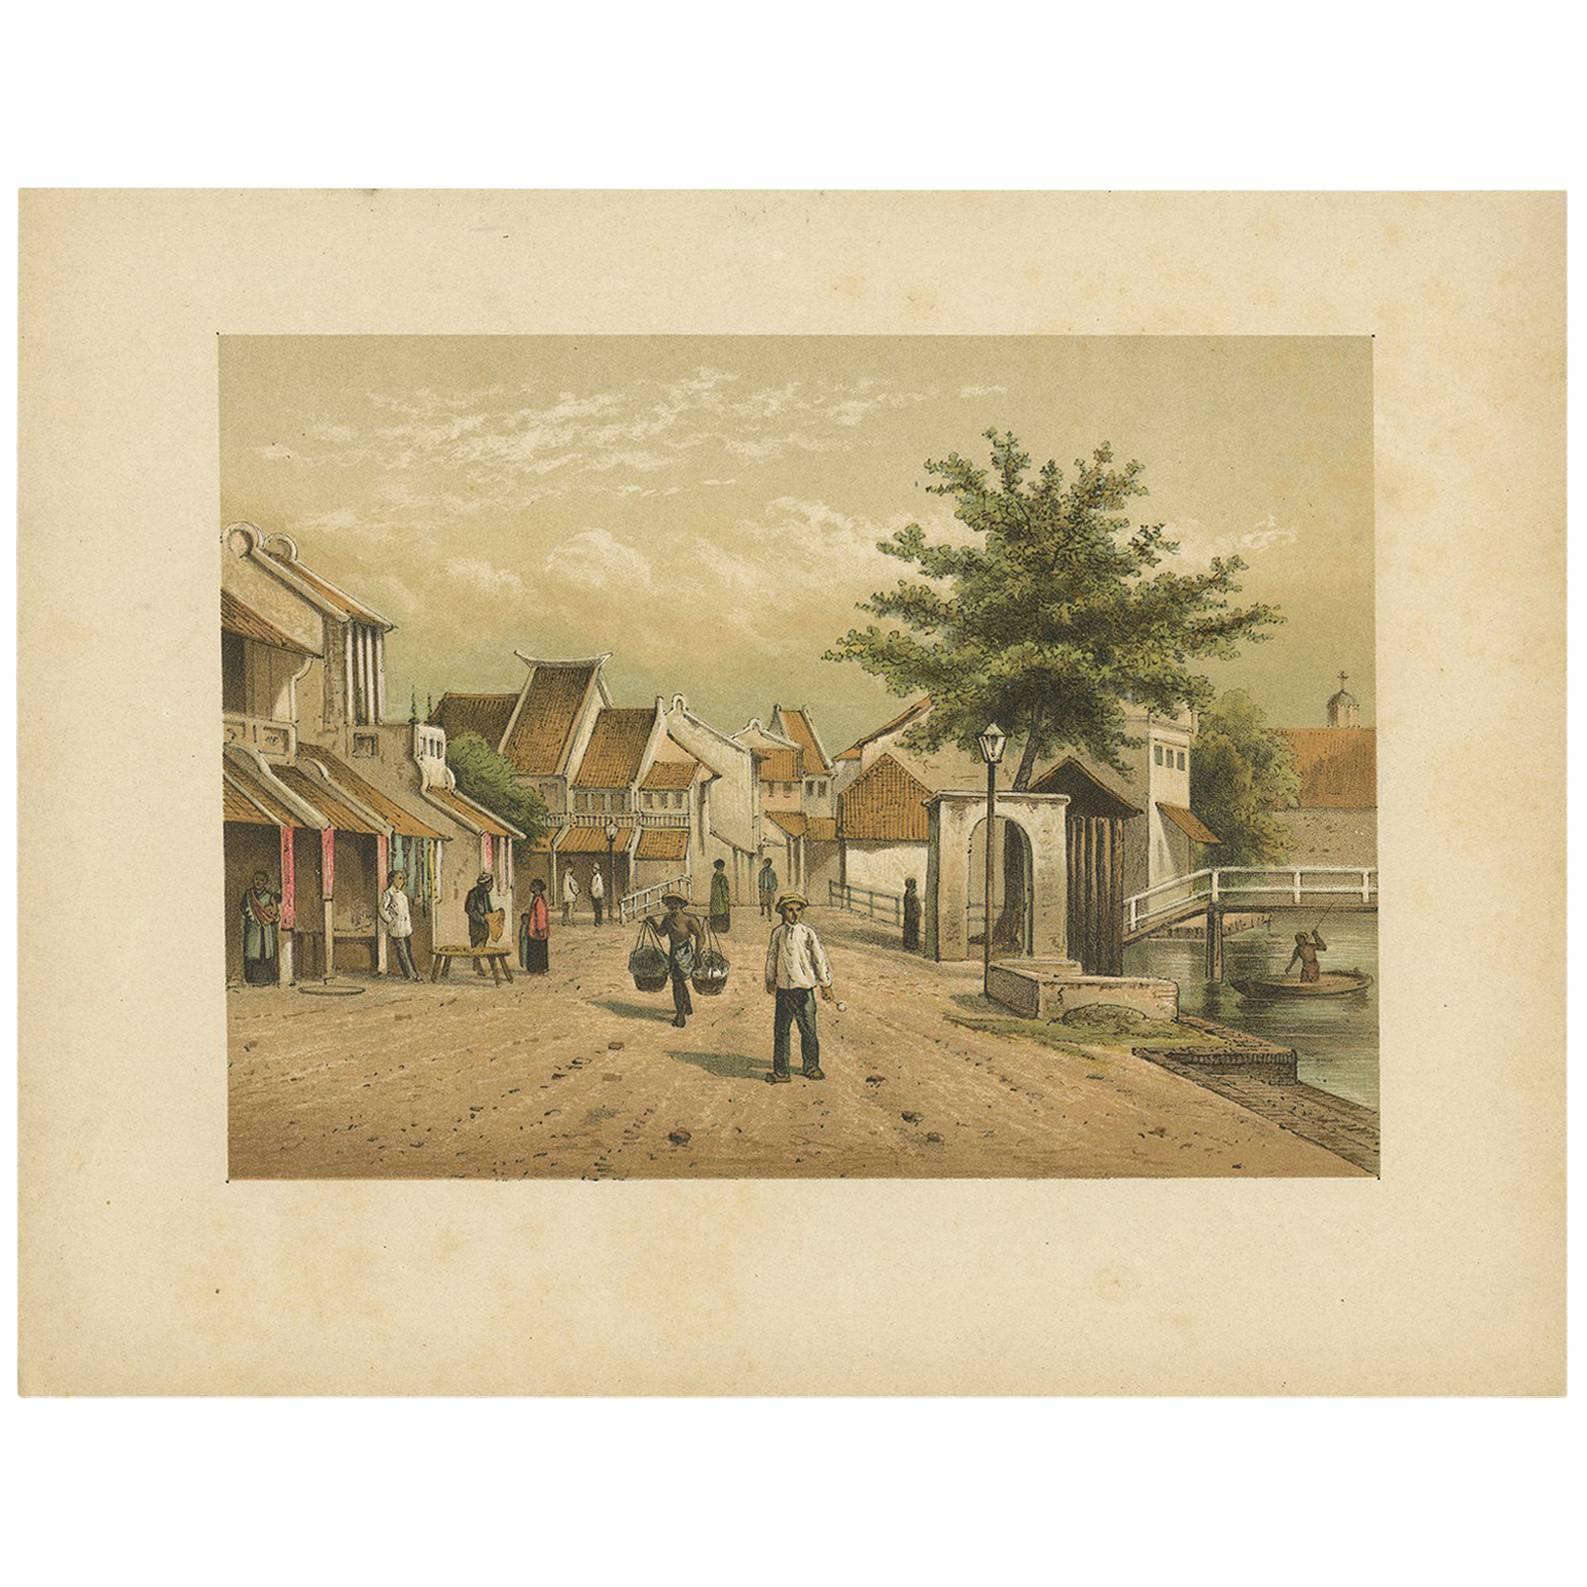 Antique Print of a Street View of Batavia, Indonesia by M.T.H. Perelaer, 1888